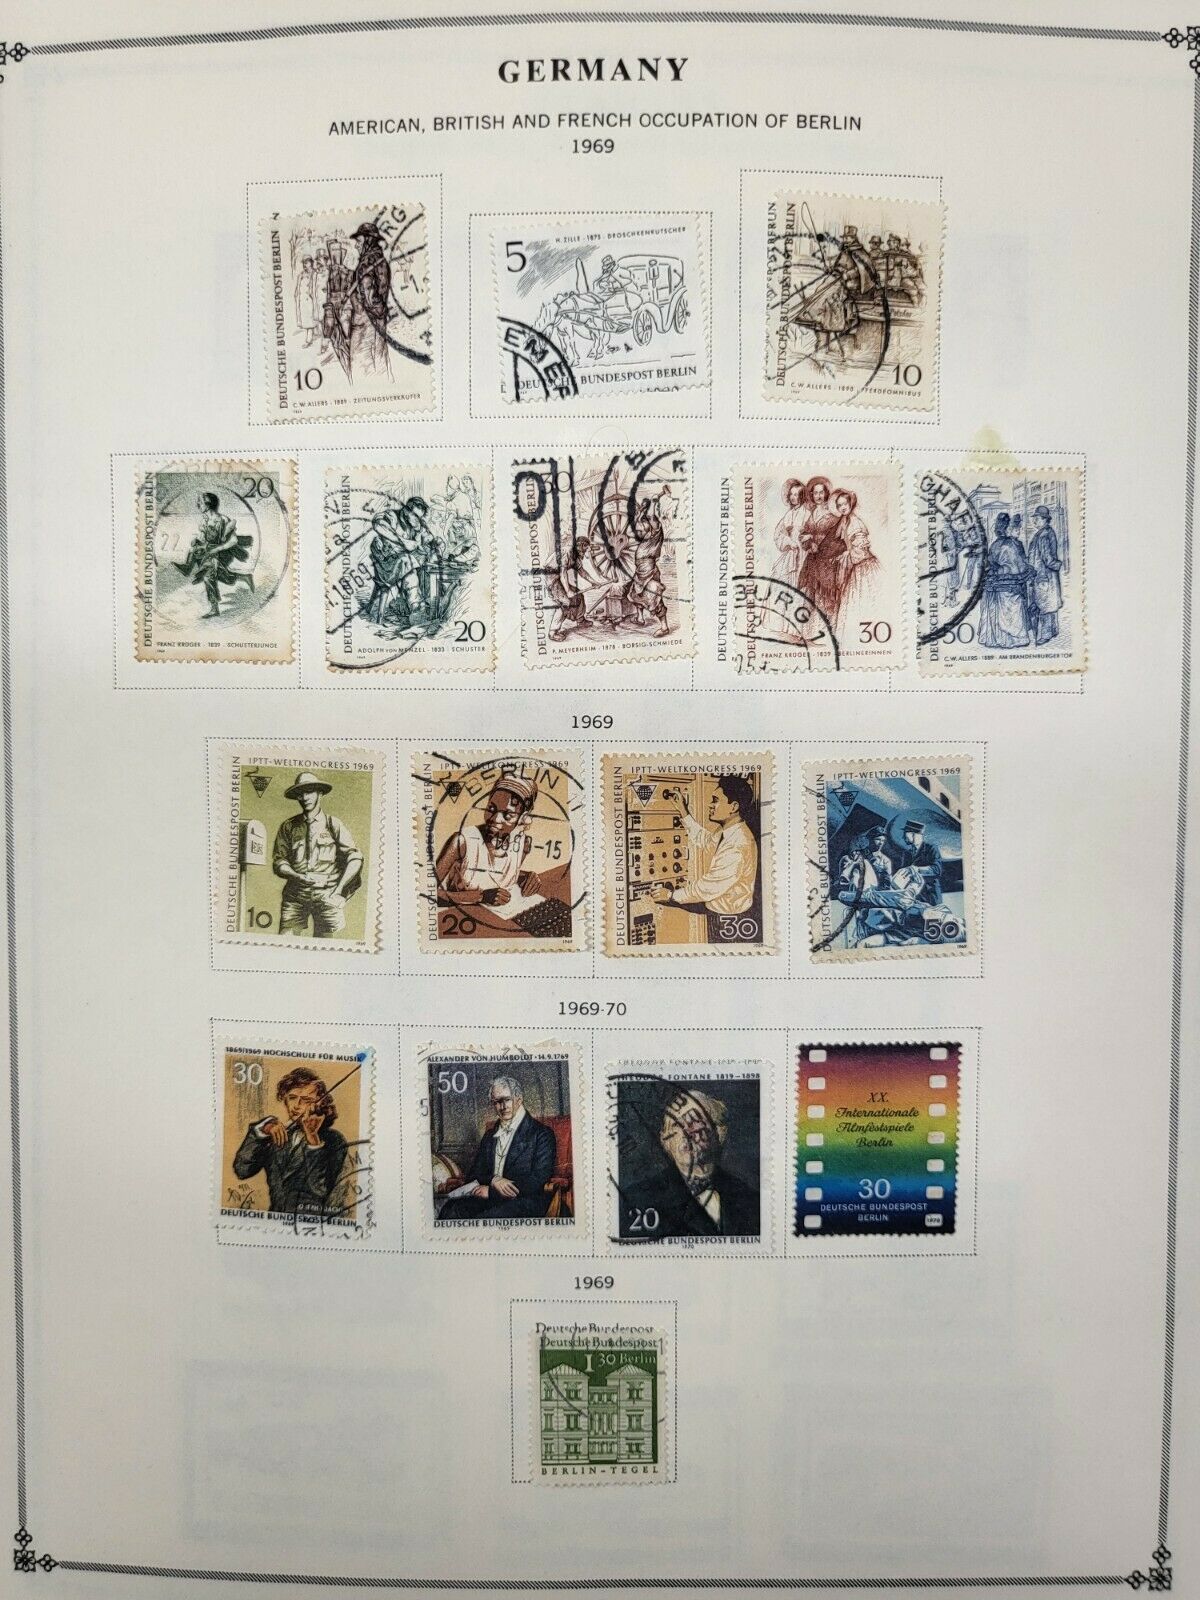 50c Sale - Germany Collection Berlin 1969 Page Lot Used - All Shown